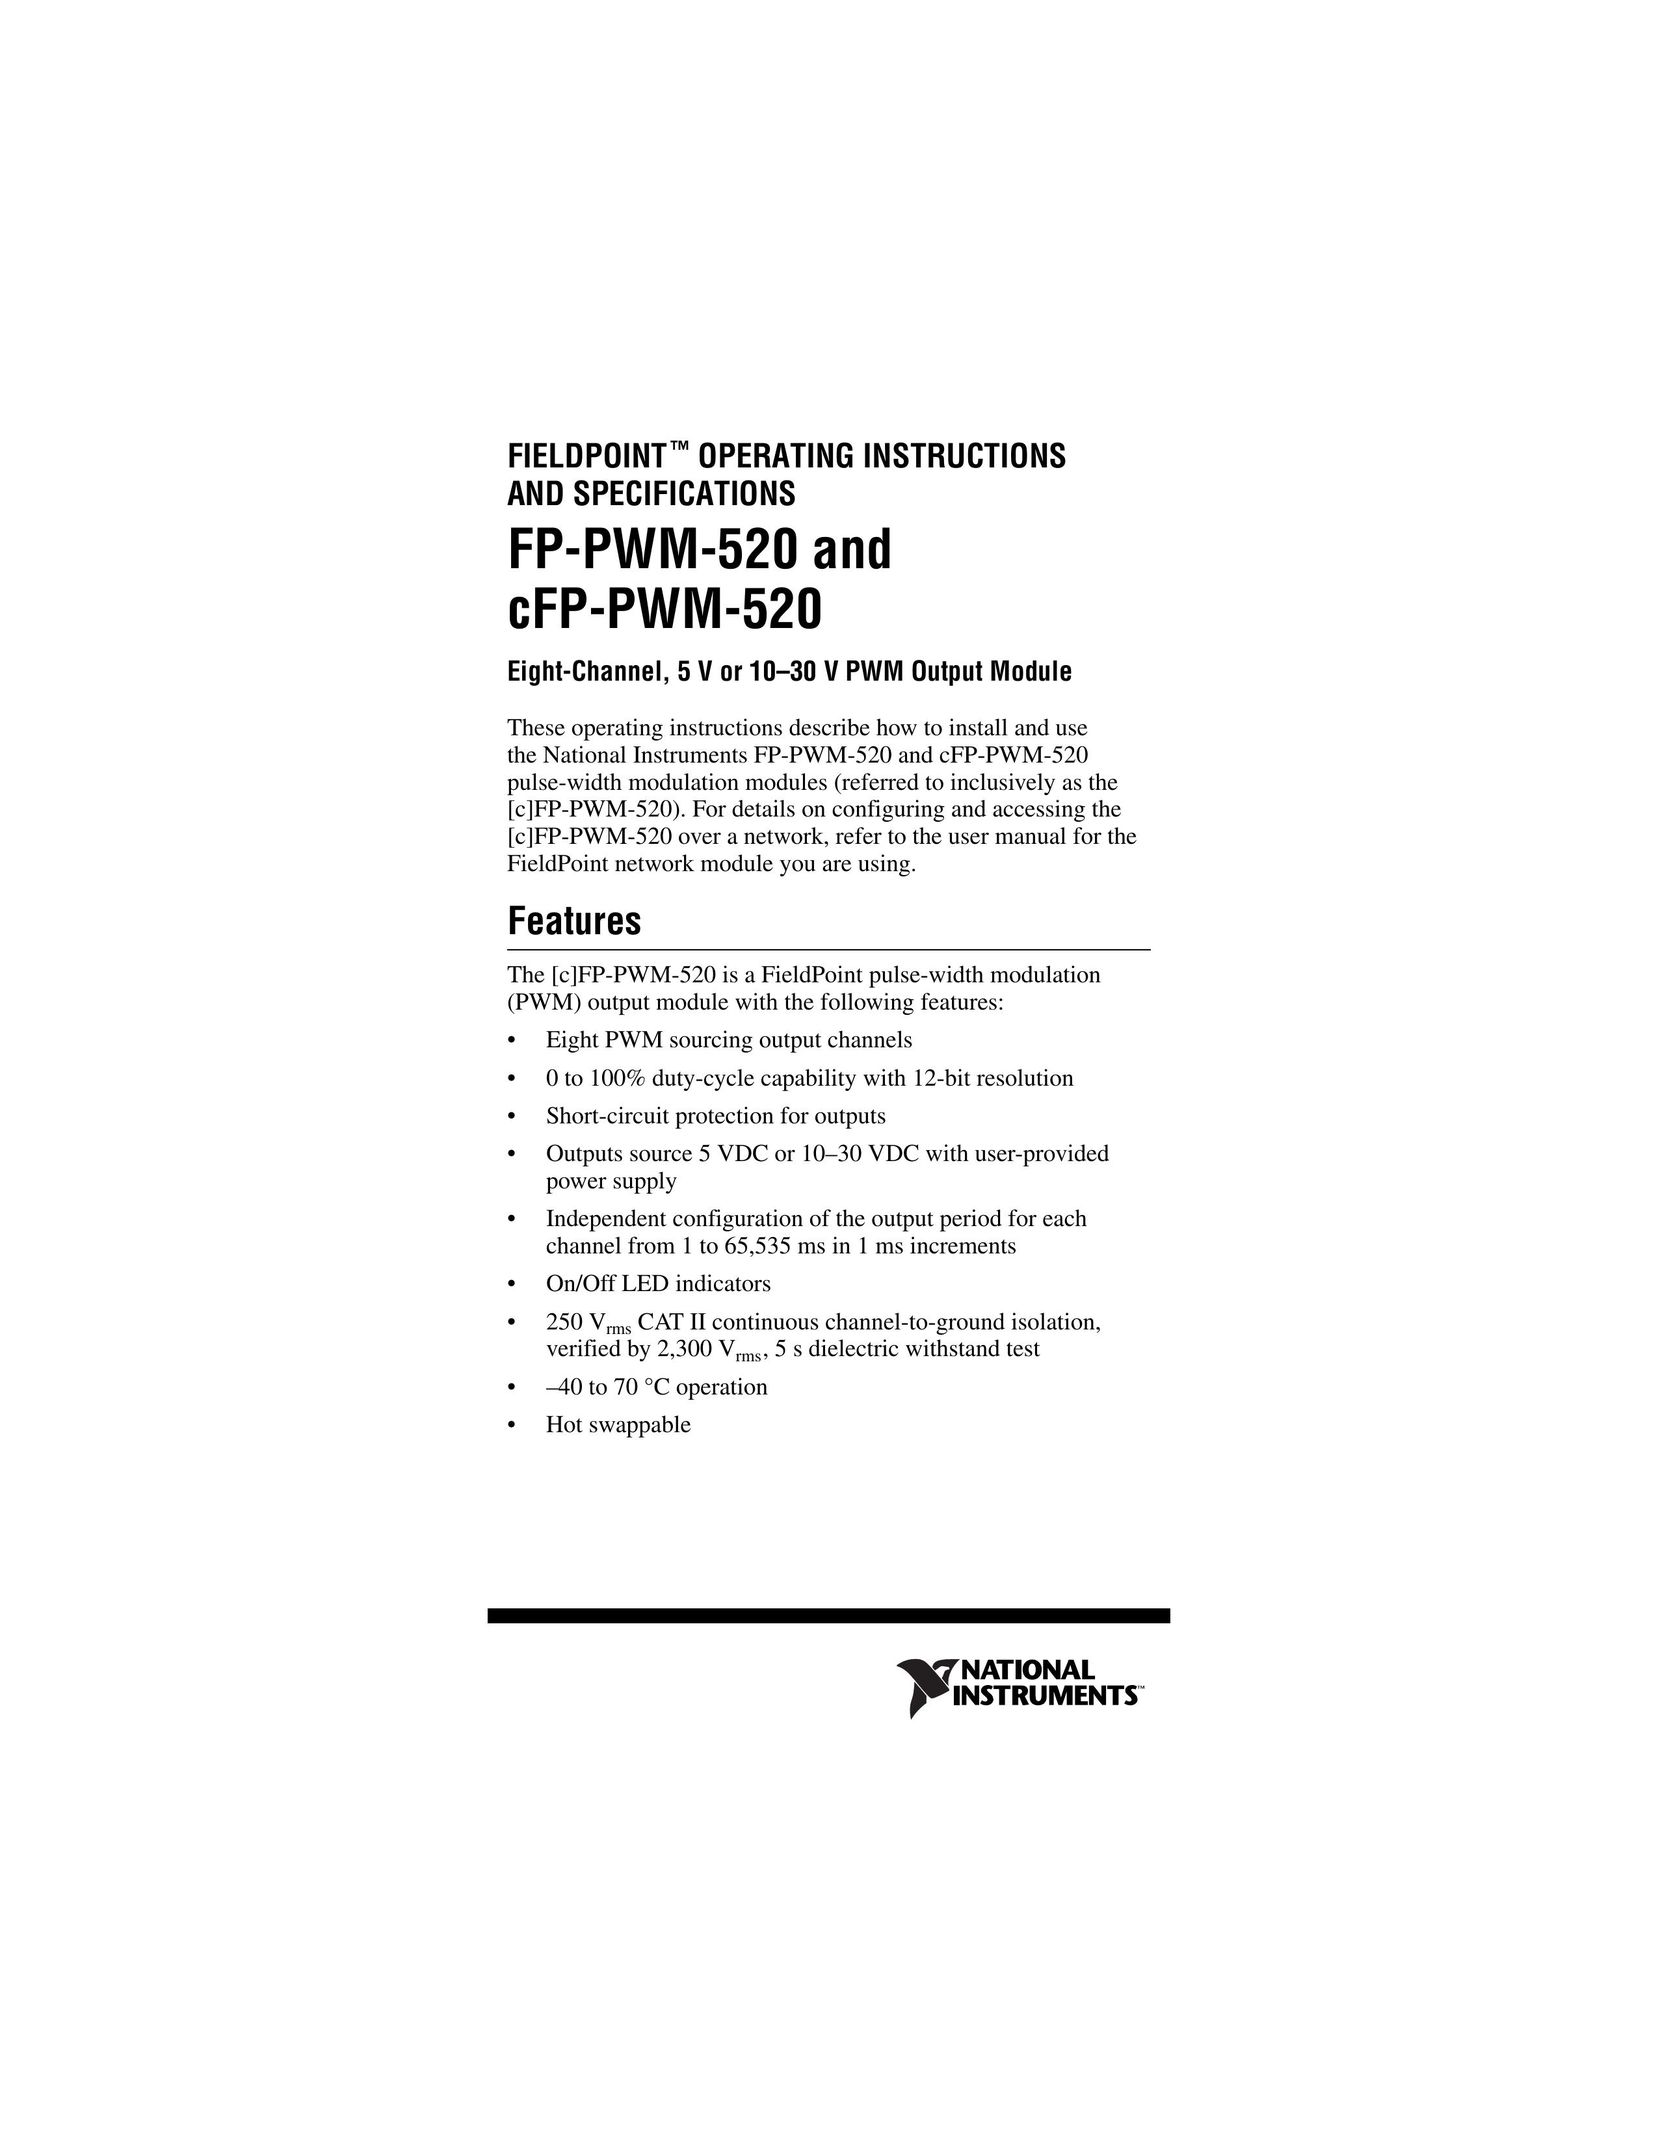 National Instruments FP-PWM-520 Network Router User Manual